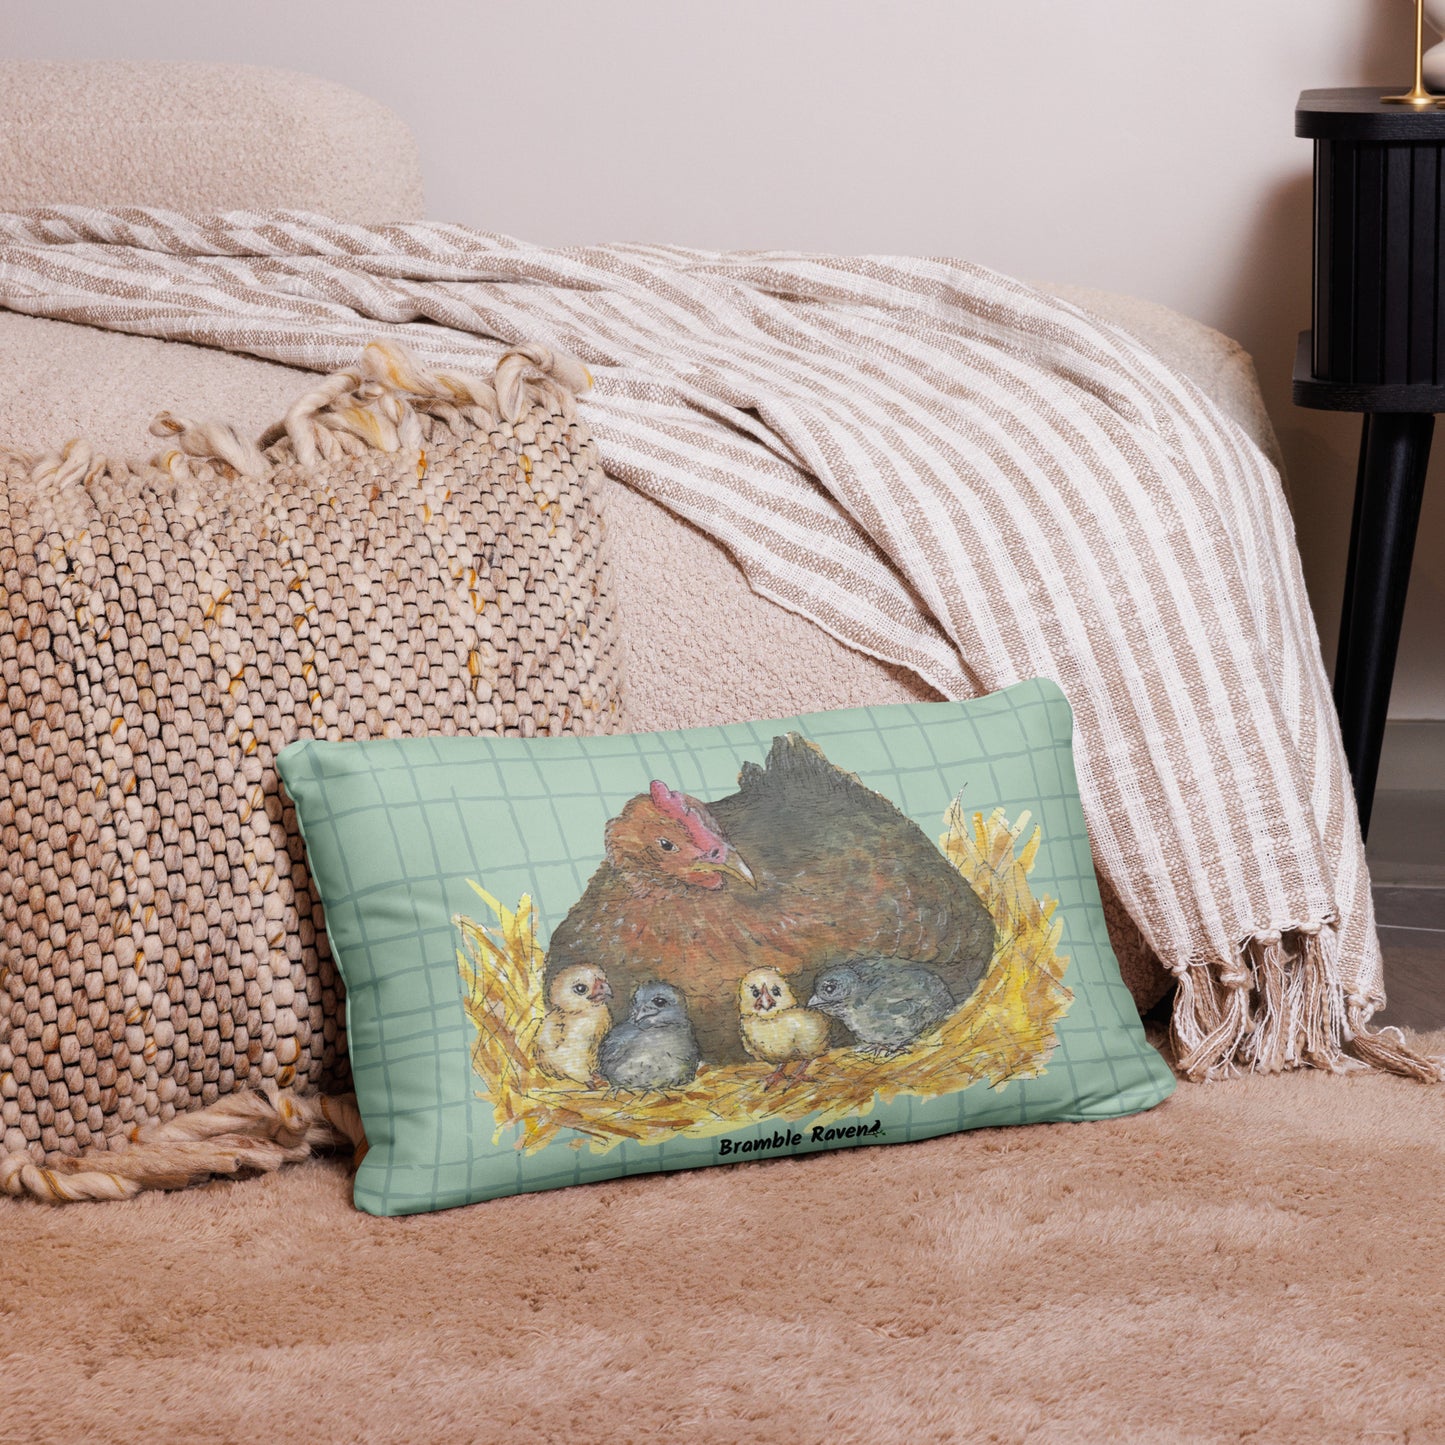 20 by 12 inch mother hen decorative throw pillow. Features Heather Silver's watercolor print of a mother hen and chicks on a green cross-hatched background. Image printed on both sides. Has a hidden zipper and washable cover. Comes with shape-retaining insert.